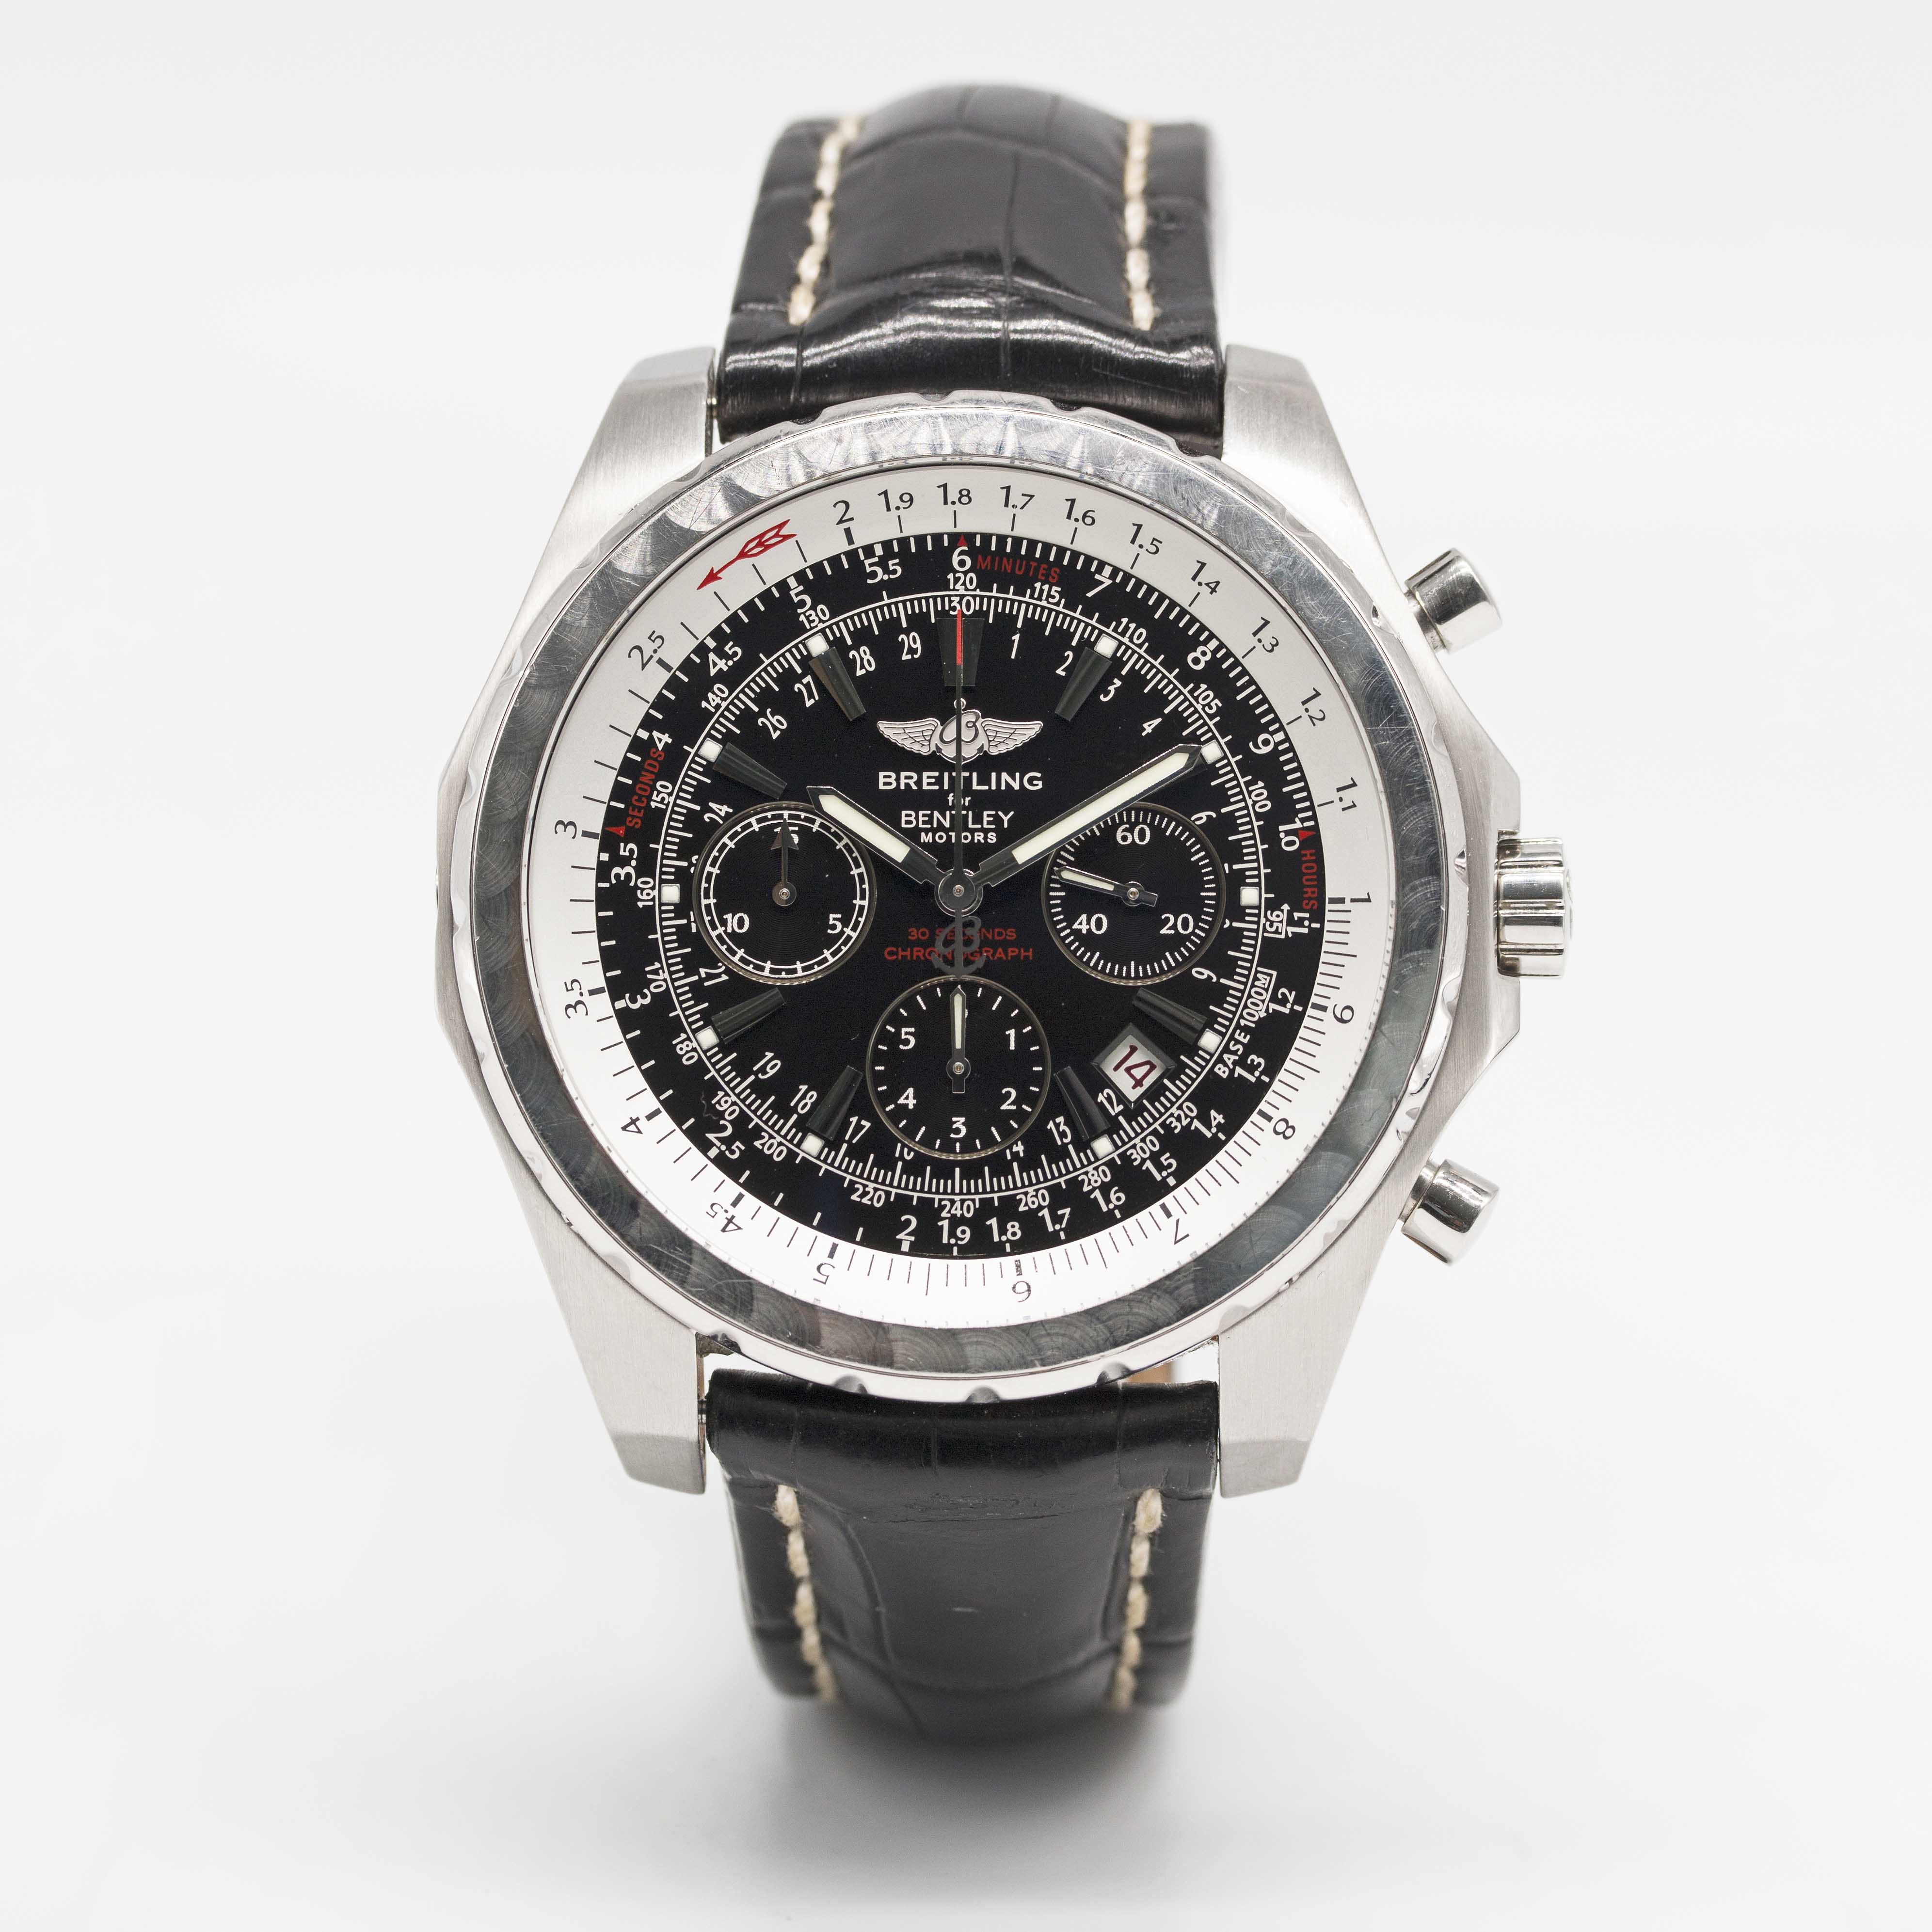 A STAINLESS STEEL BREITLING BENTLEY MOTORS T CHRONOGRAPH WRIST WATCH CIRCA 2007, REF. A25363 WITH - Image 2 of 9